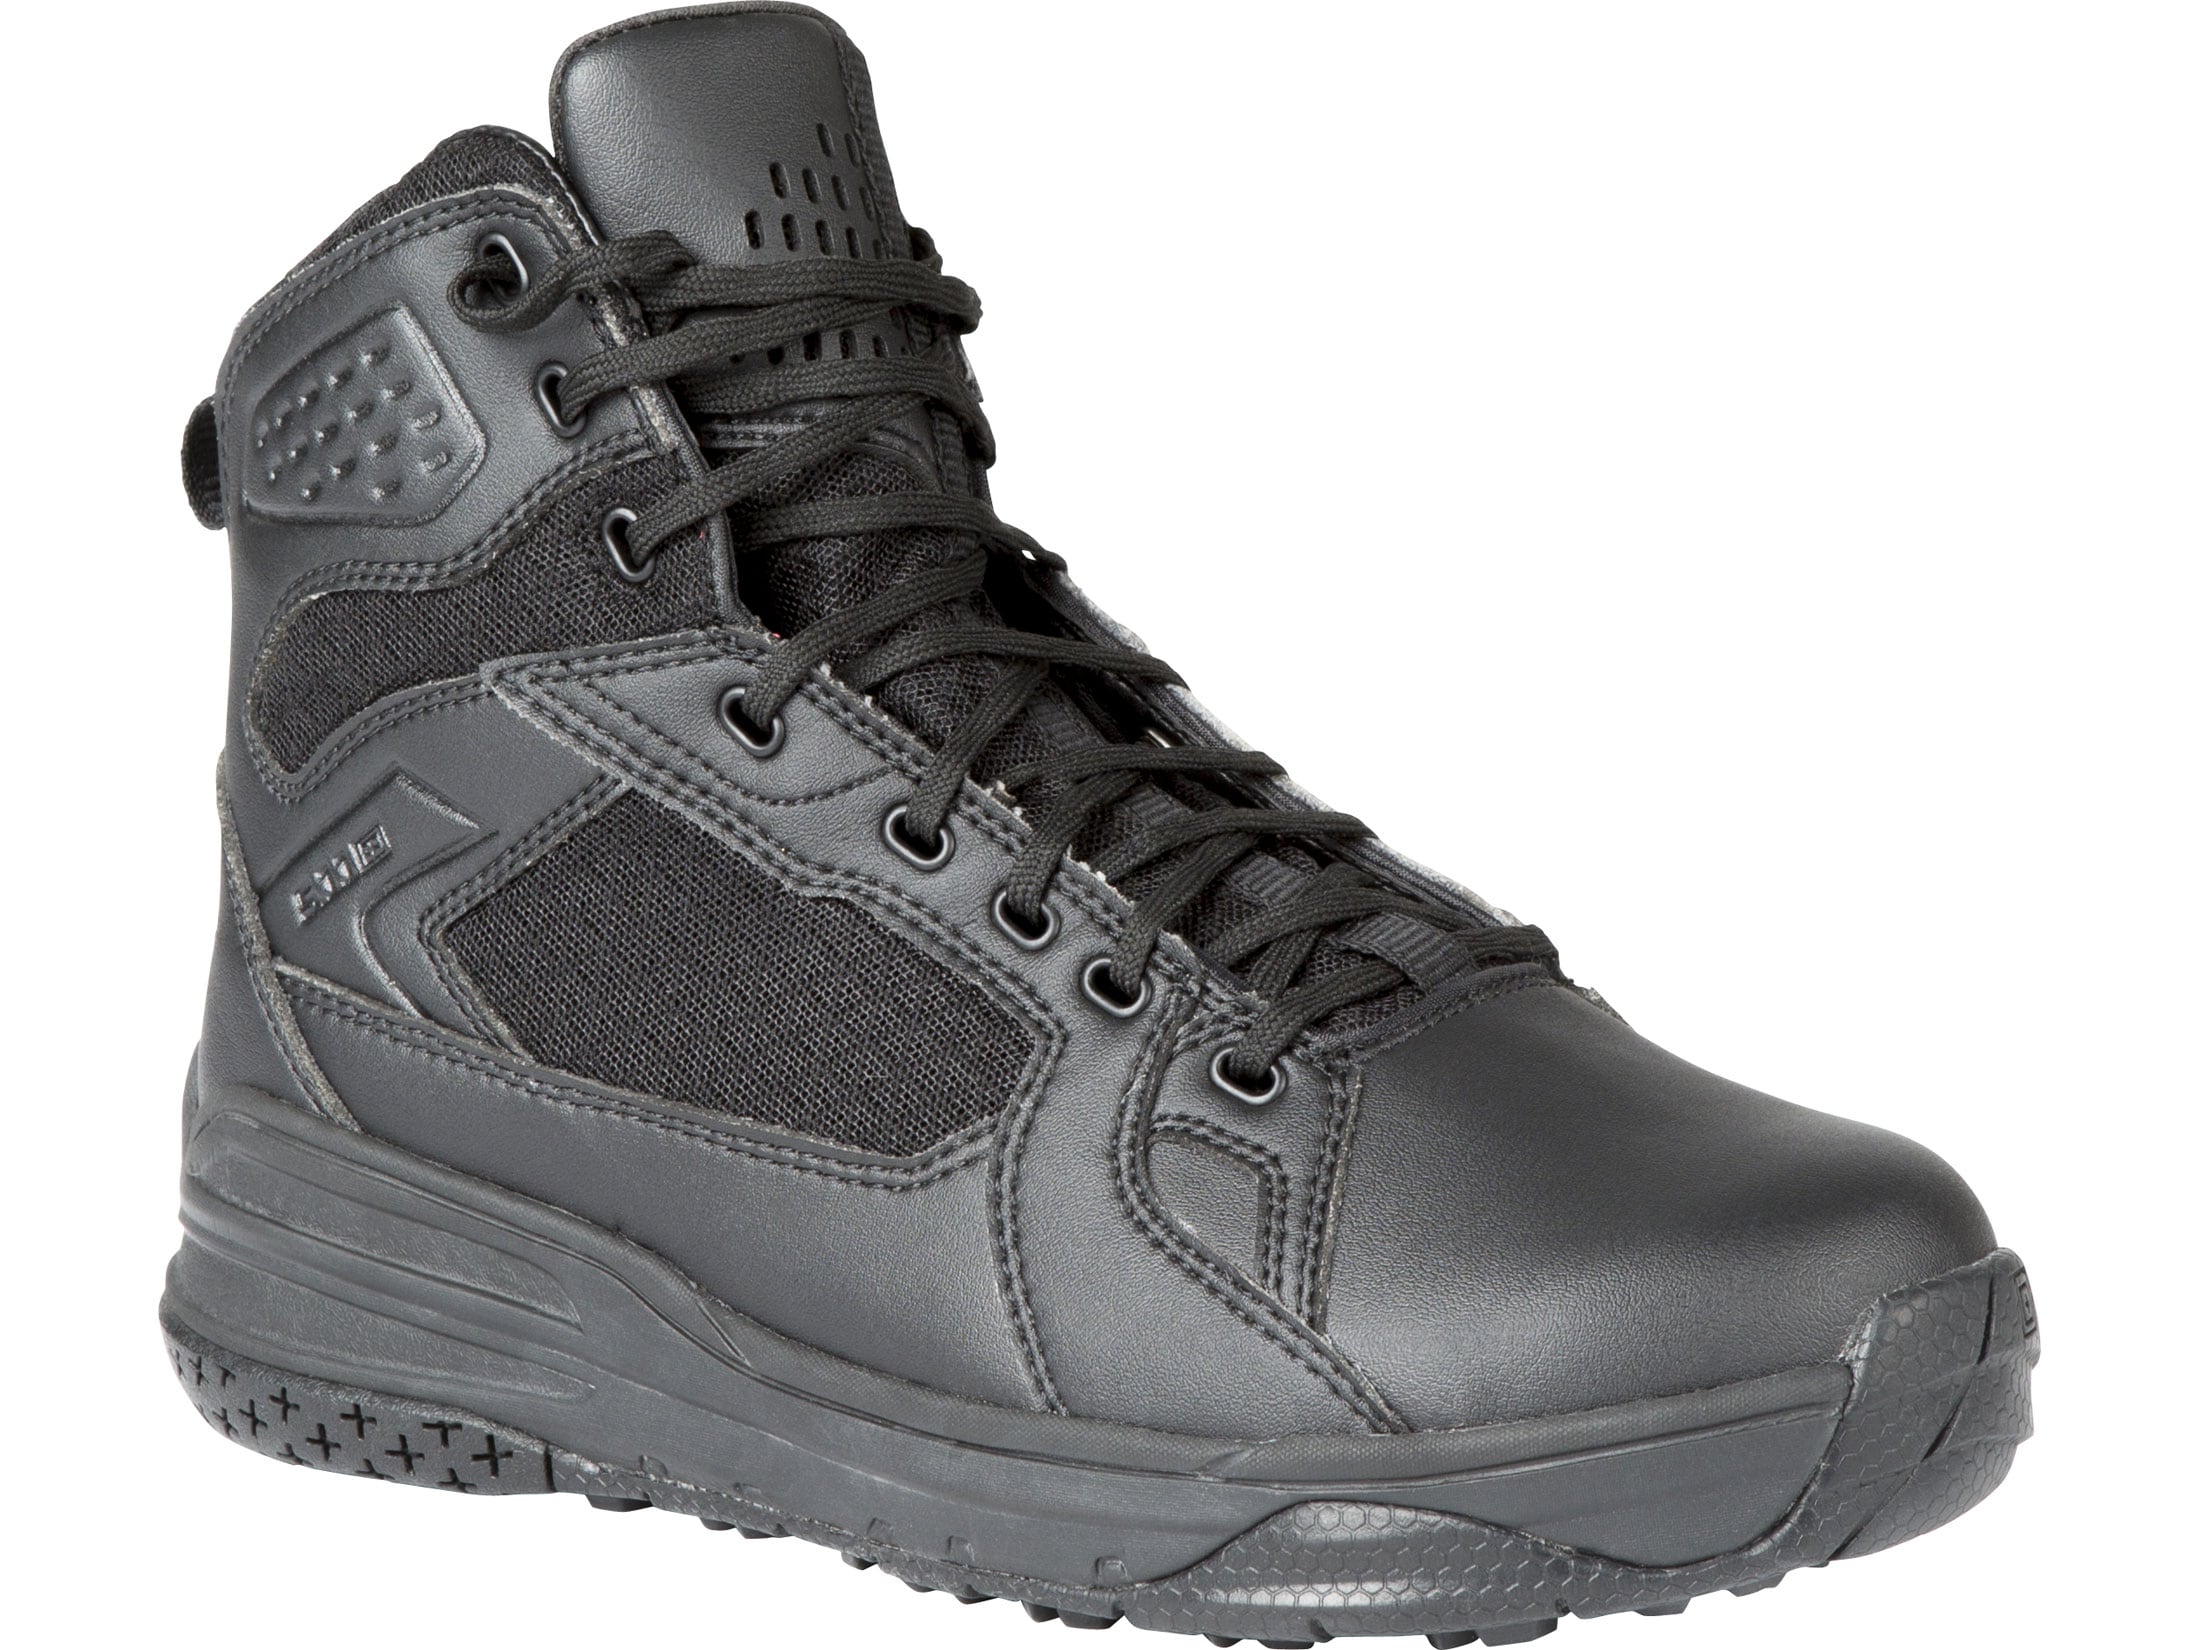 5.11 Halcyon Patrol Tactical Boots Polishable Synthetic Leather Black